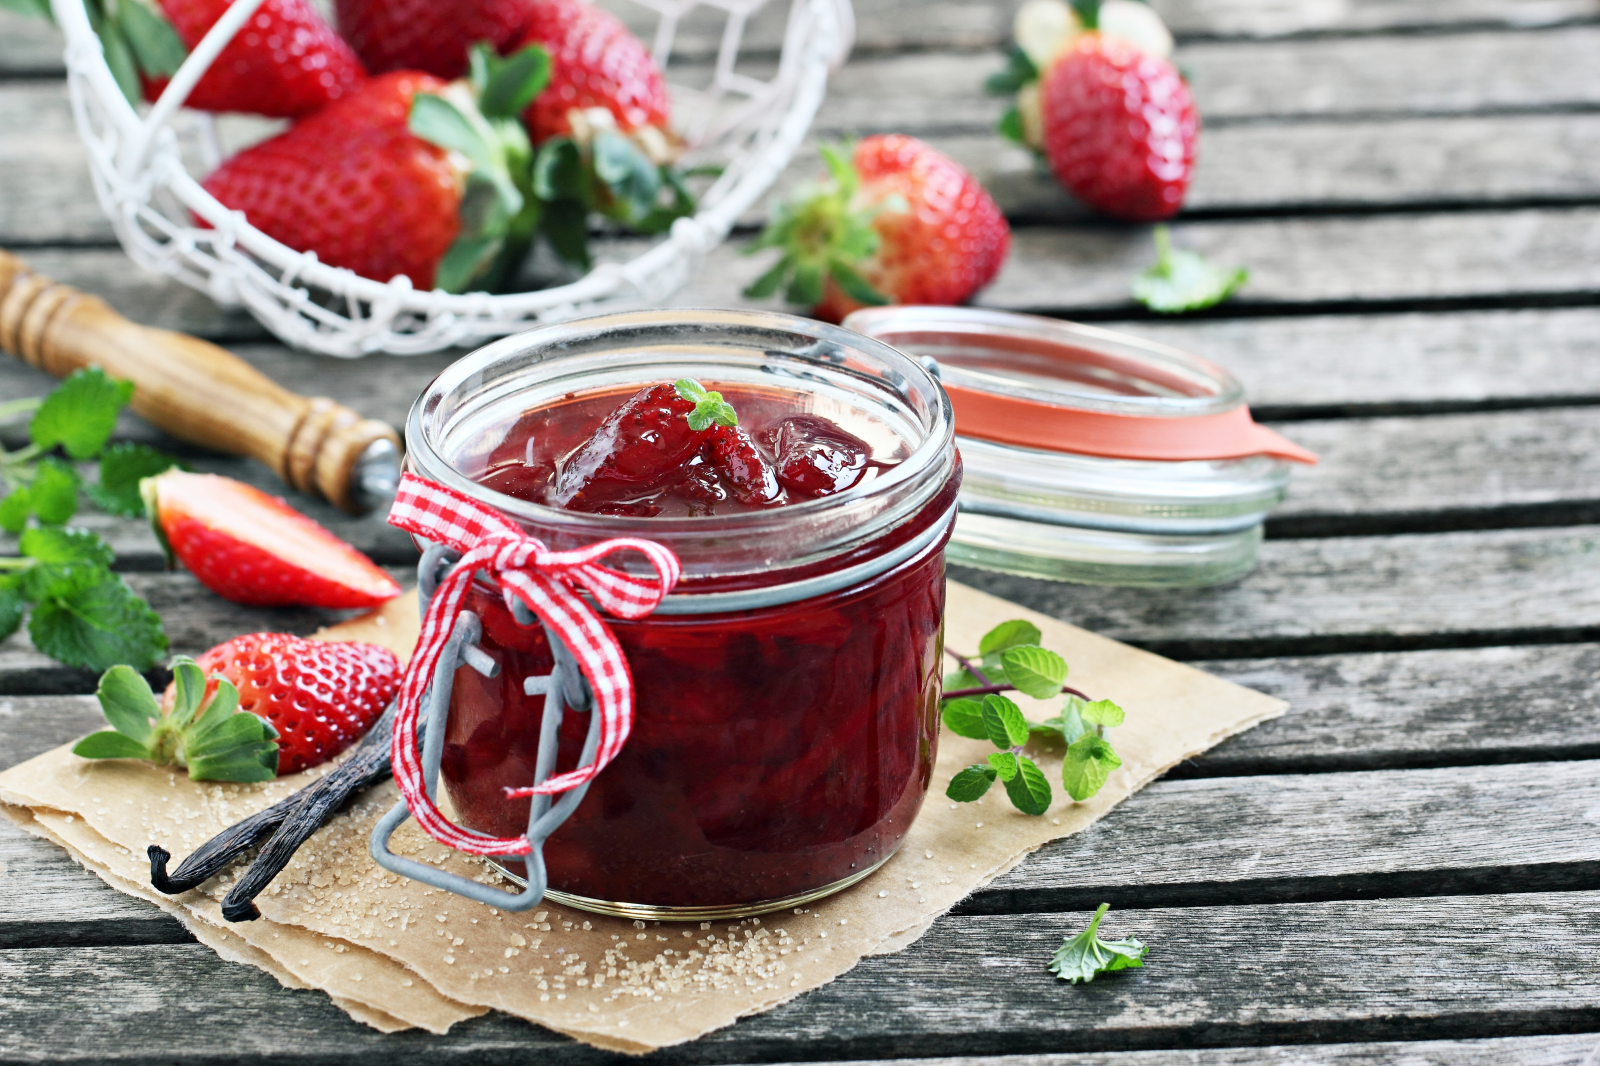 Here's the Easiest Way to Make Sugar-Free Jam from Scratch